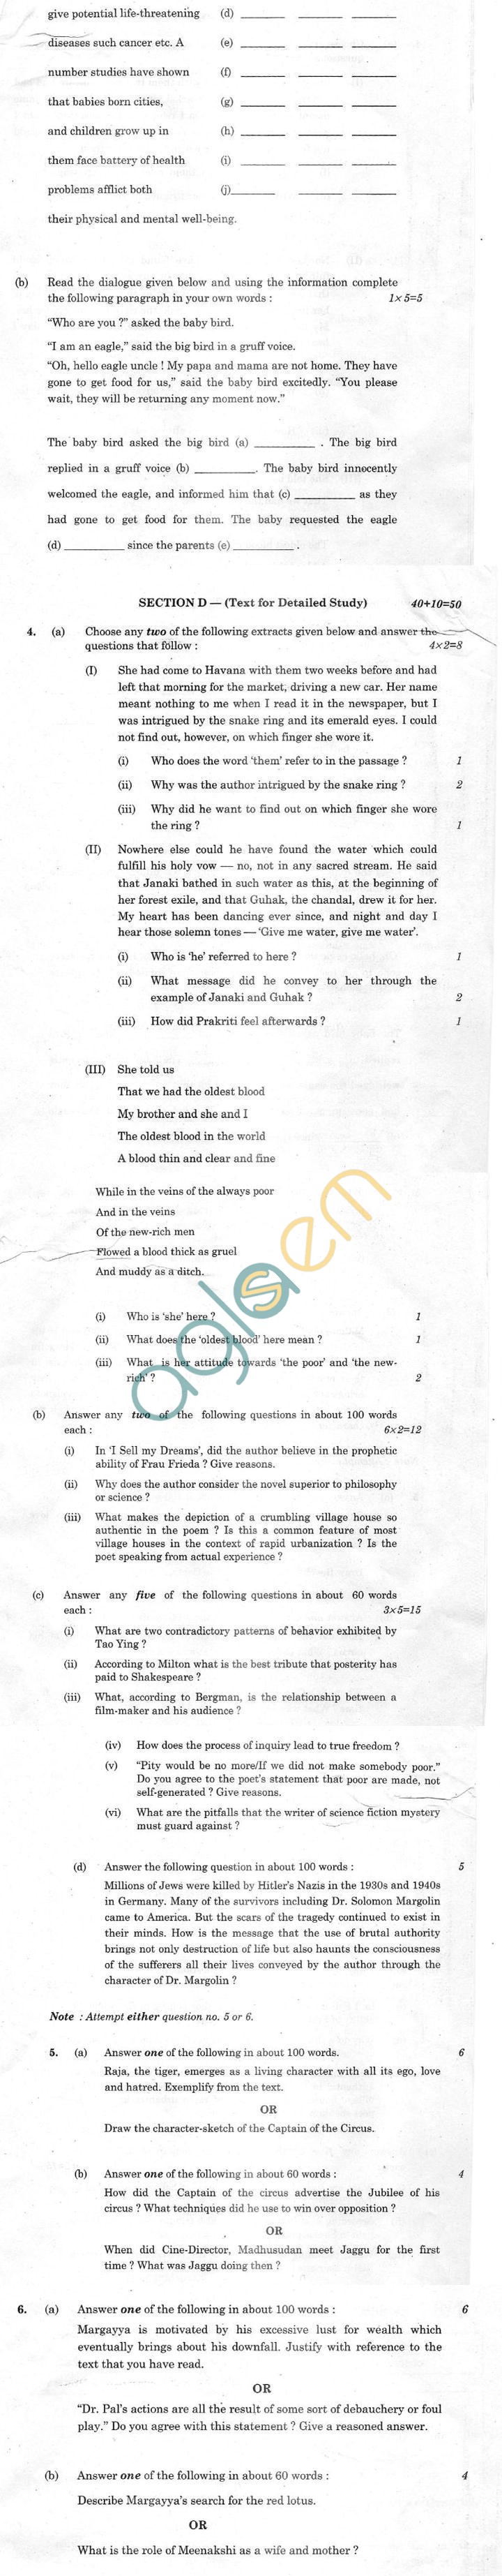 CBSE Compartment Exam 2013 Class XII Question Paper - English (Elective)